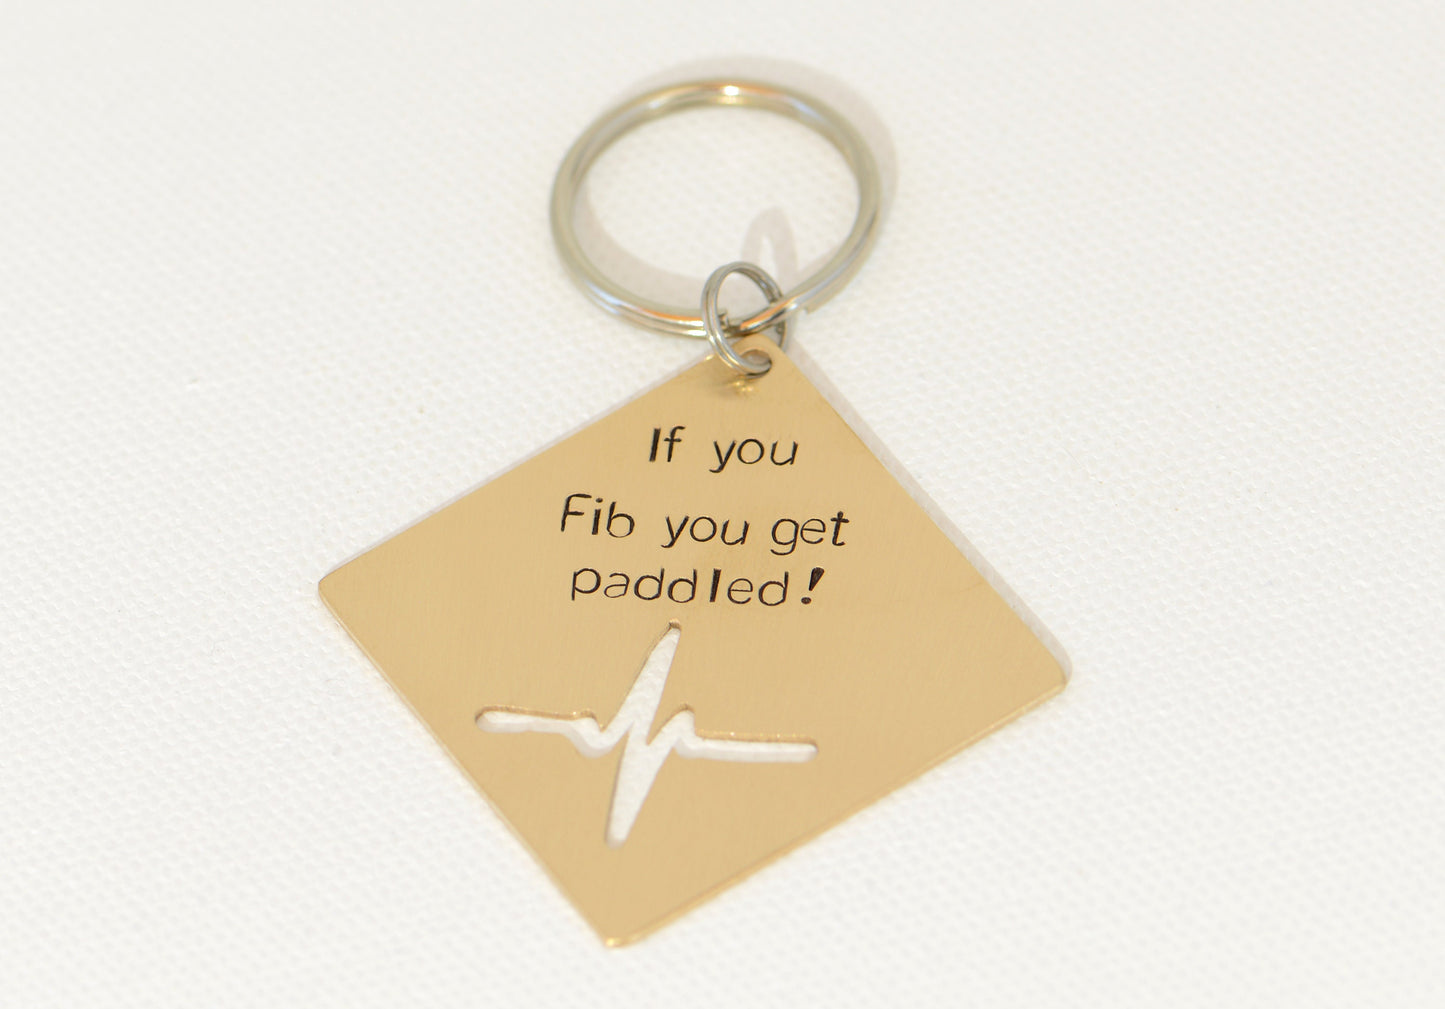 If you Fib you get paddled bronze key chain with heartbeat